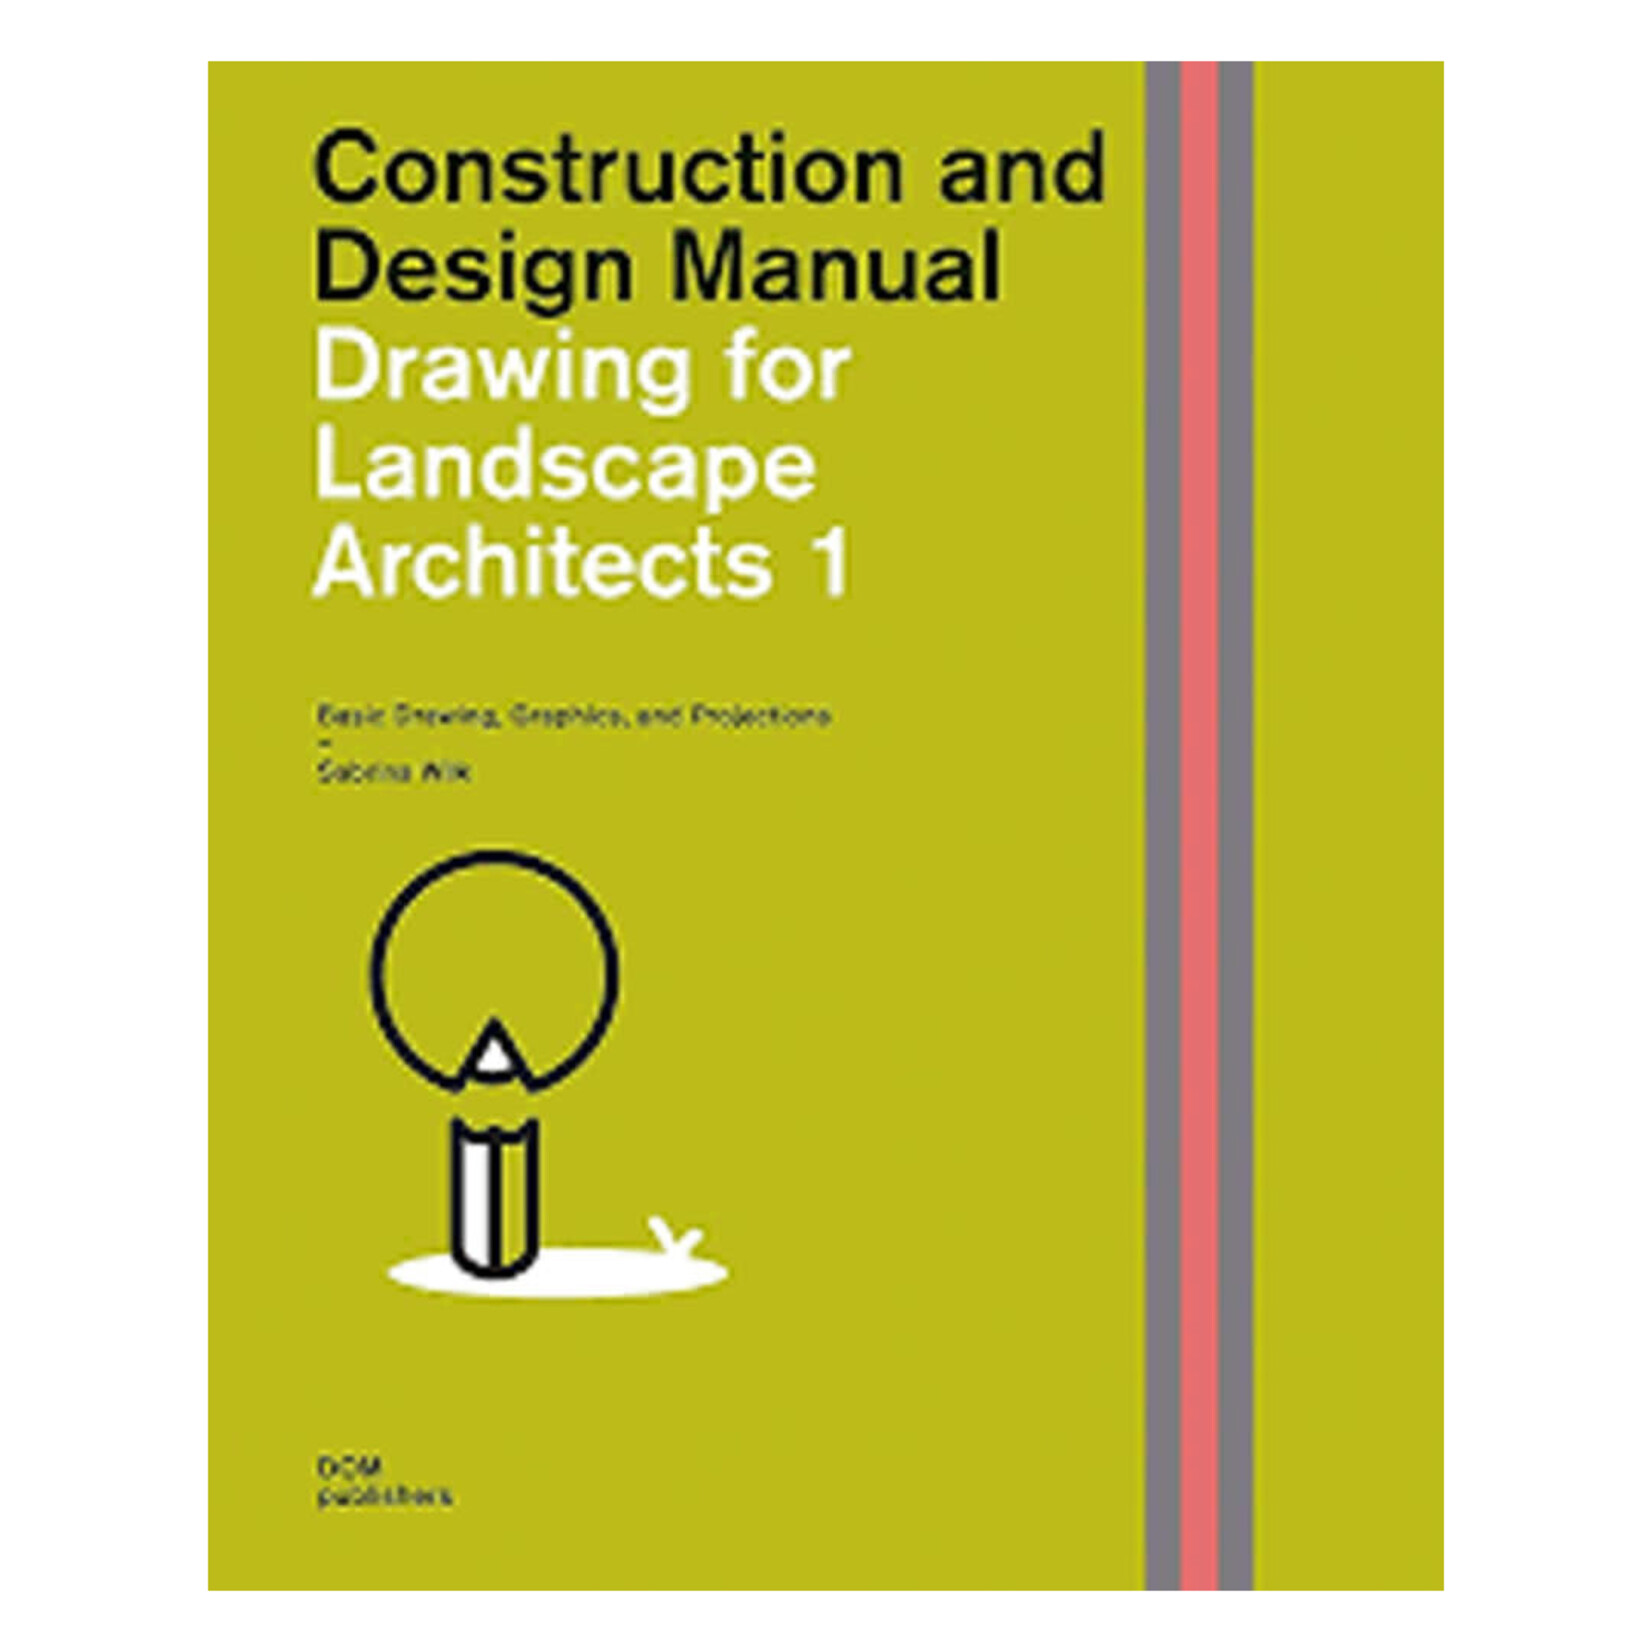 Drawing for Landscape Architects, Second Edition: Construction and Design Manual